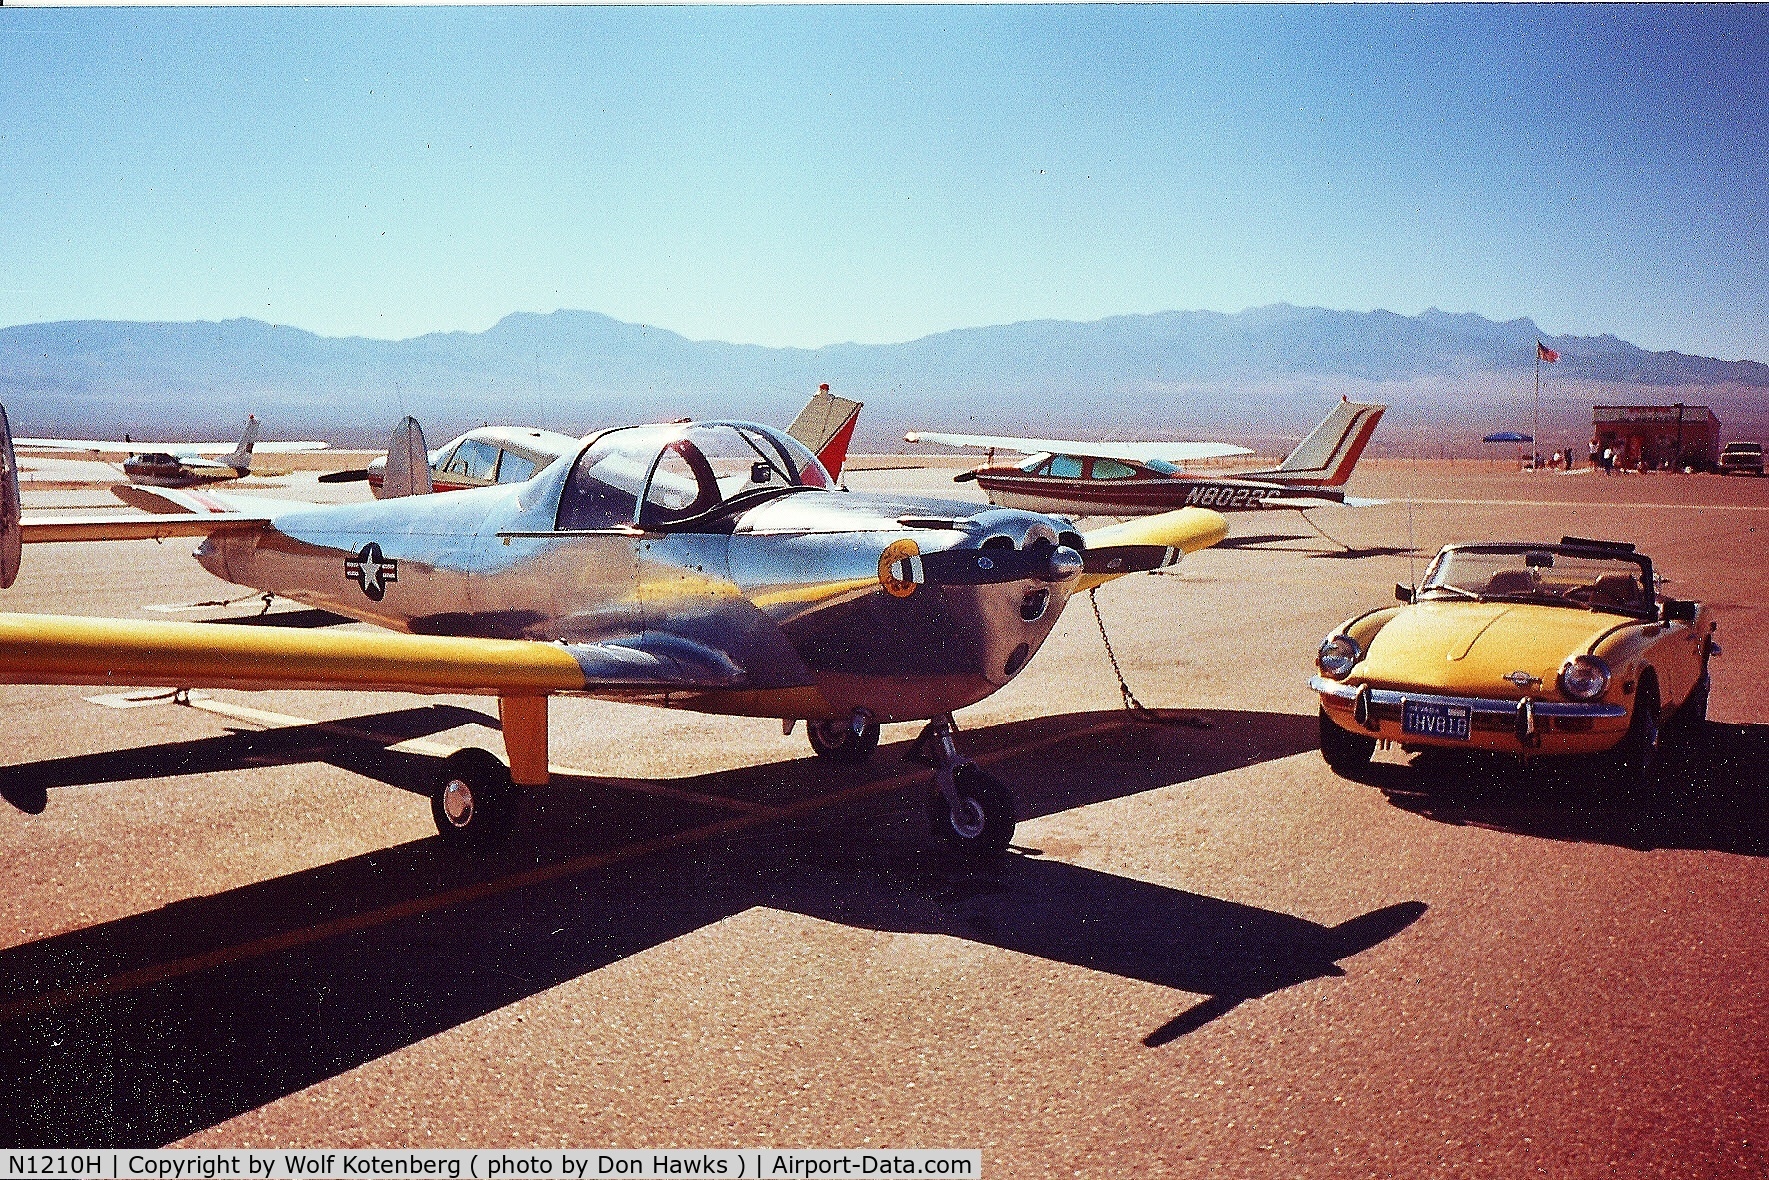 N1210H, 1946 Erco 415C Ercoupe C/N 3887, two classics ( image courtesy of Don Hawks )